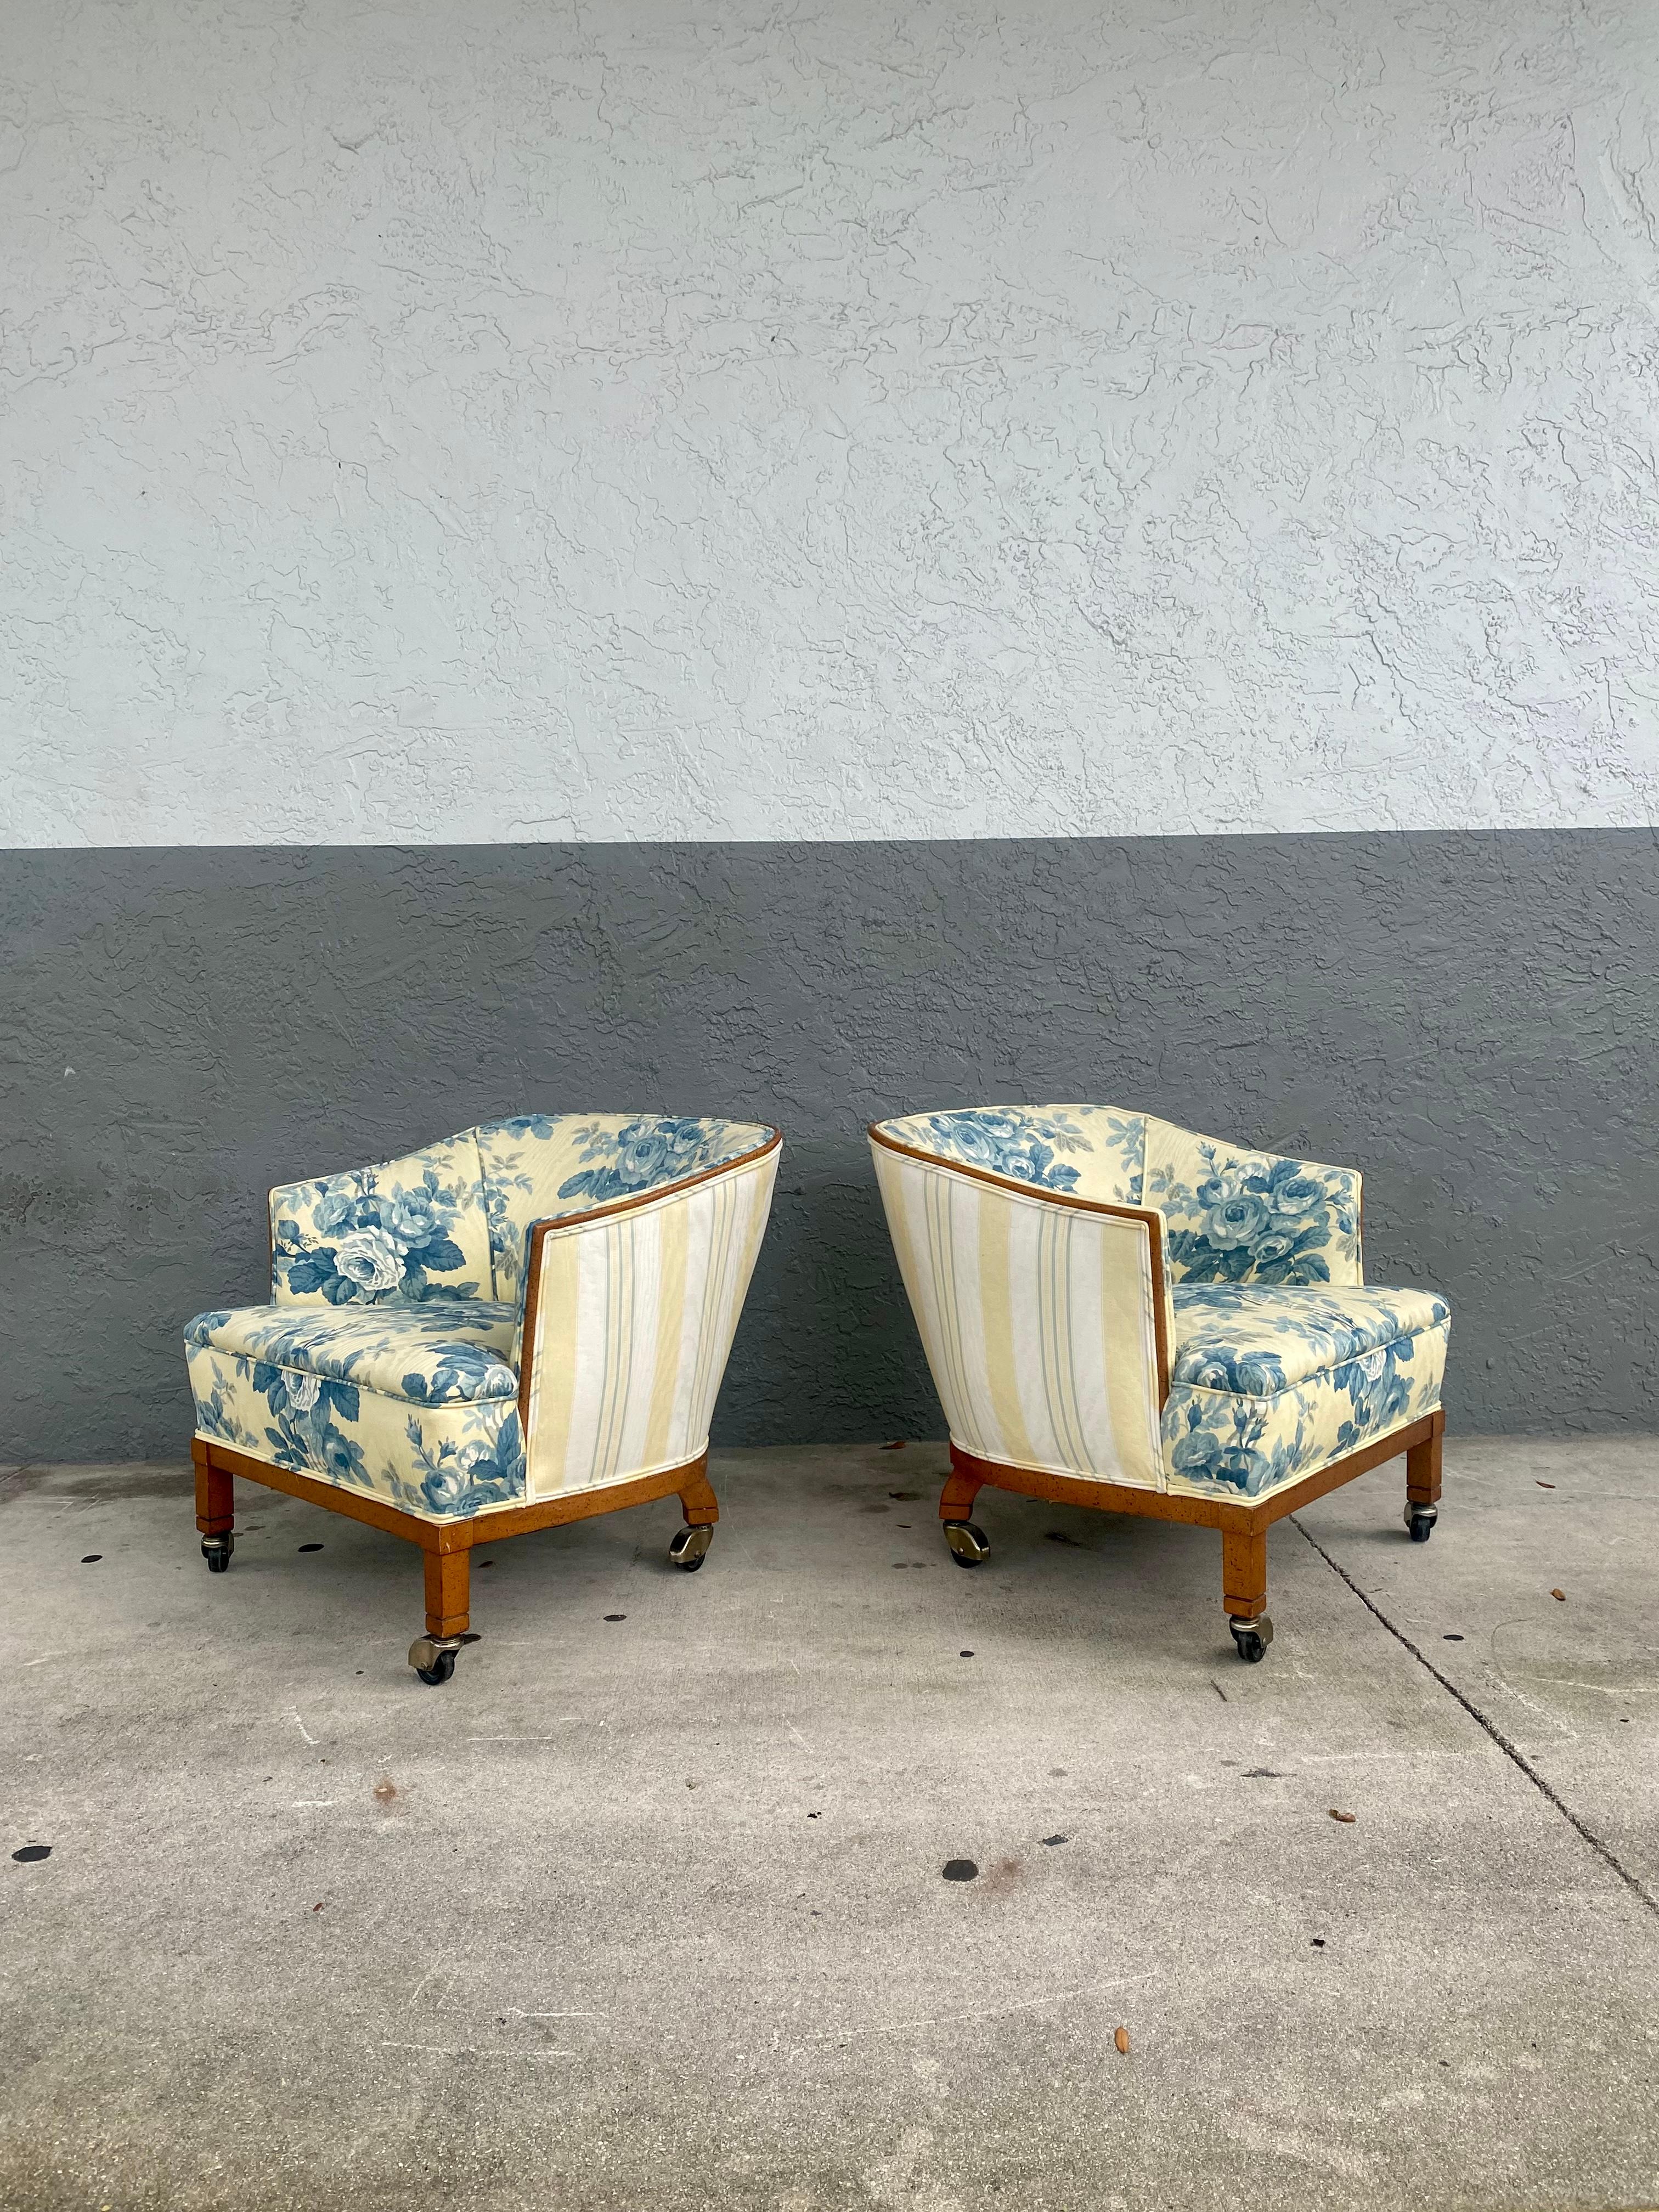 Upholstery 1960s French Toile Barrel Back Wood Castors Chairs, Set of 2 For Sale